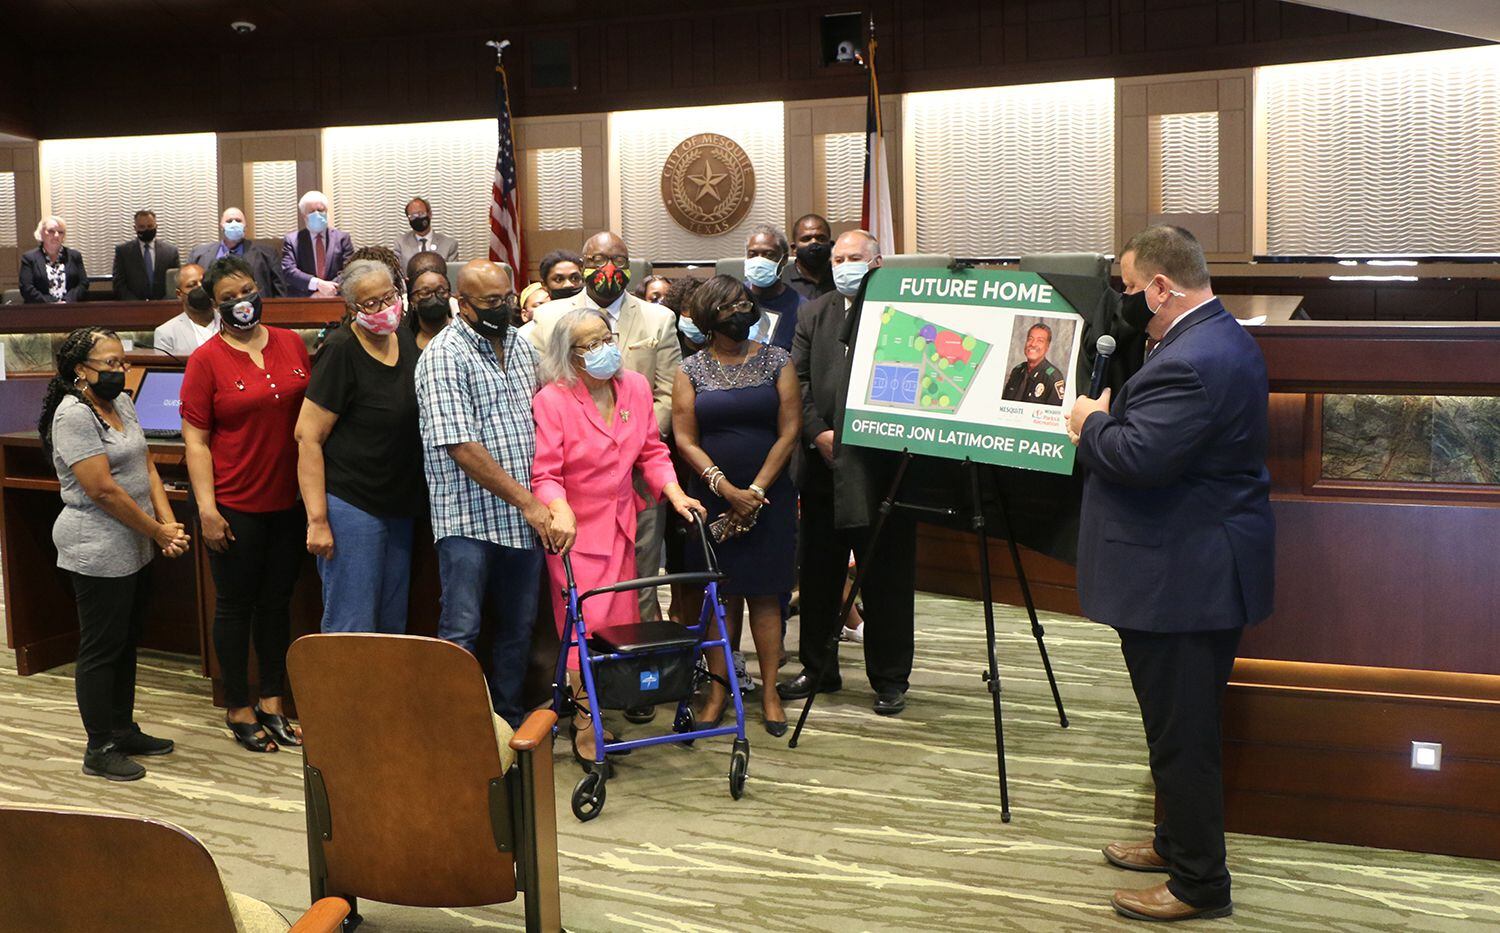 Mayor Bruce Archer presents plans for Jon Latimore park to the late police officer's family Tuesday at the Mesquite City Council meeting. Latimore was the city's first African American officer when he joined the force in 1985.